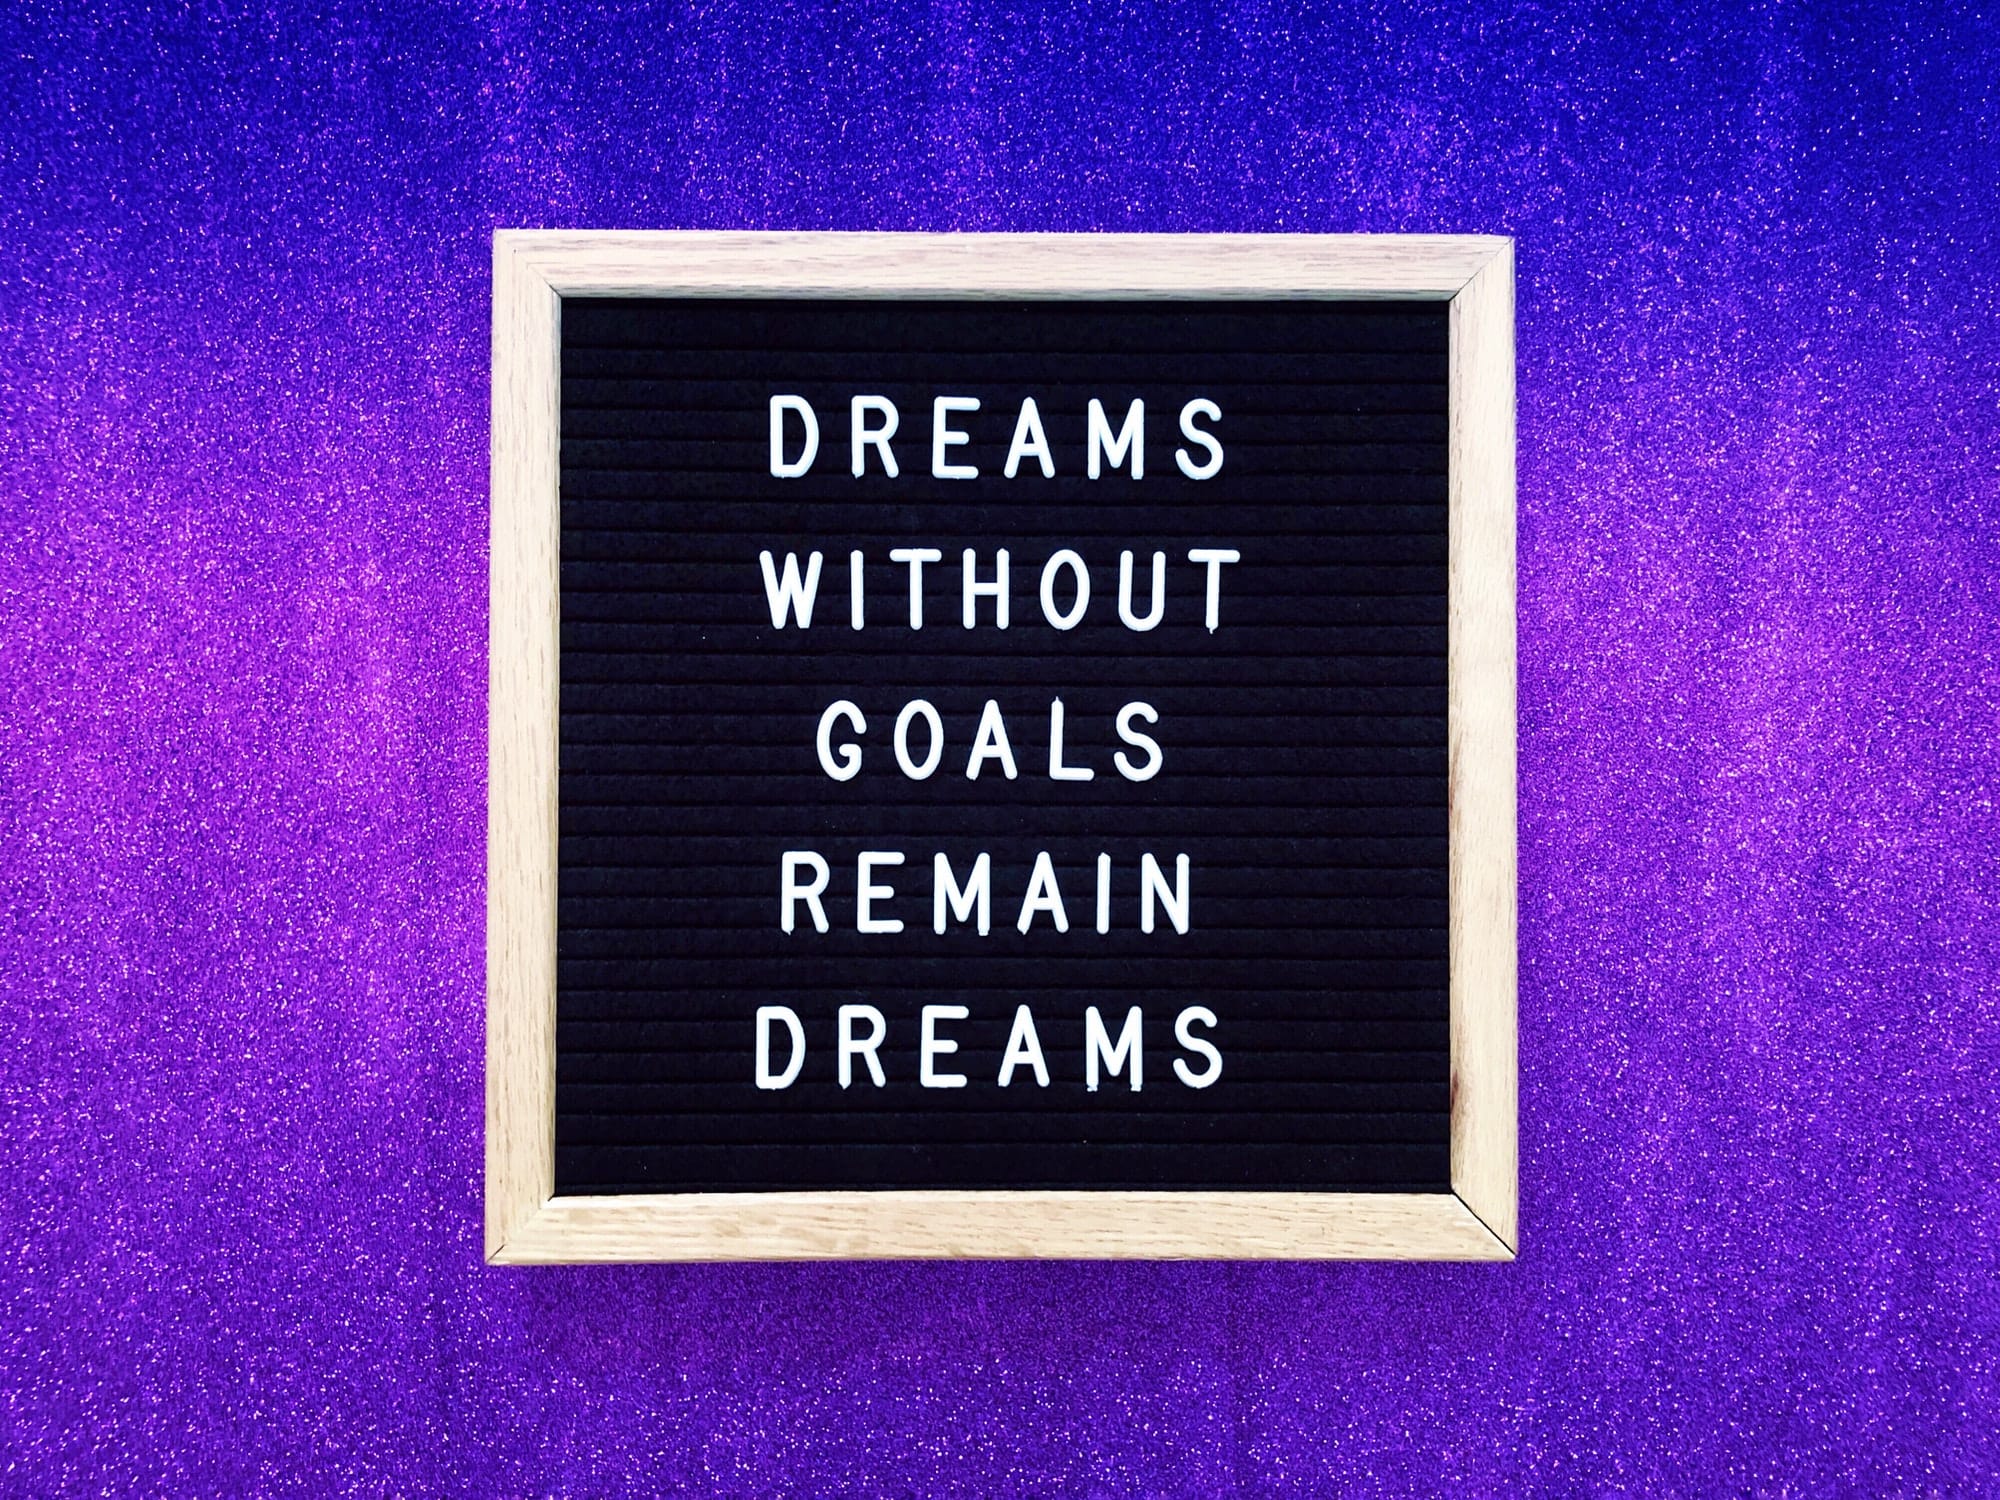 Dreams without goals remain dreams